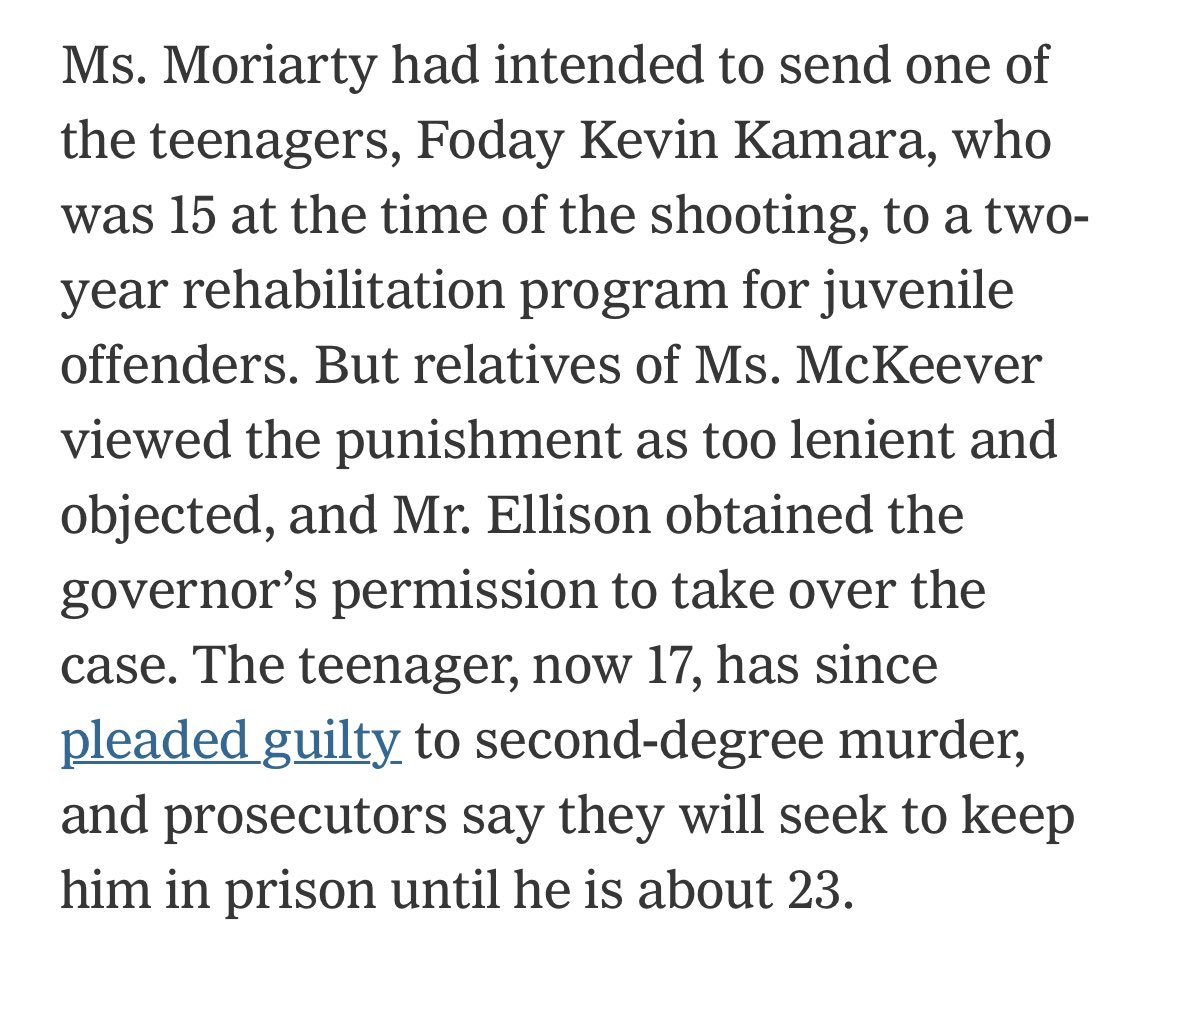 Which better promotes public safety: putting the kid in a 2-year rehabilitation program for juveniles, or putting the kid in adult prison until 23? There’s an actual, objective answer to that question. I wish NY Times believed that providing it to readers was part of its job.